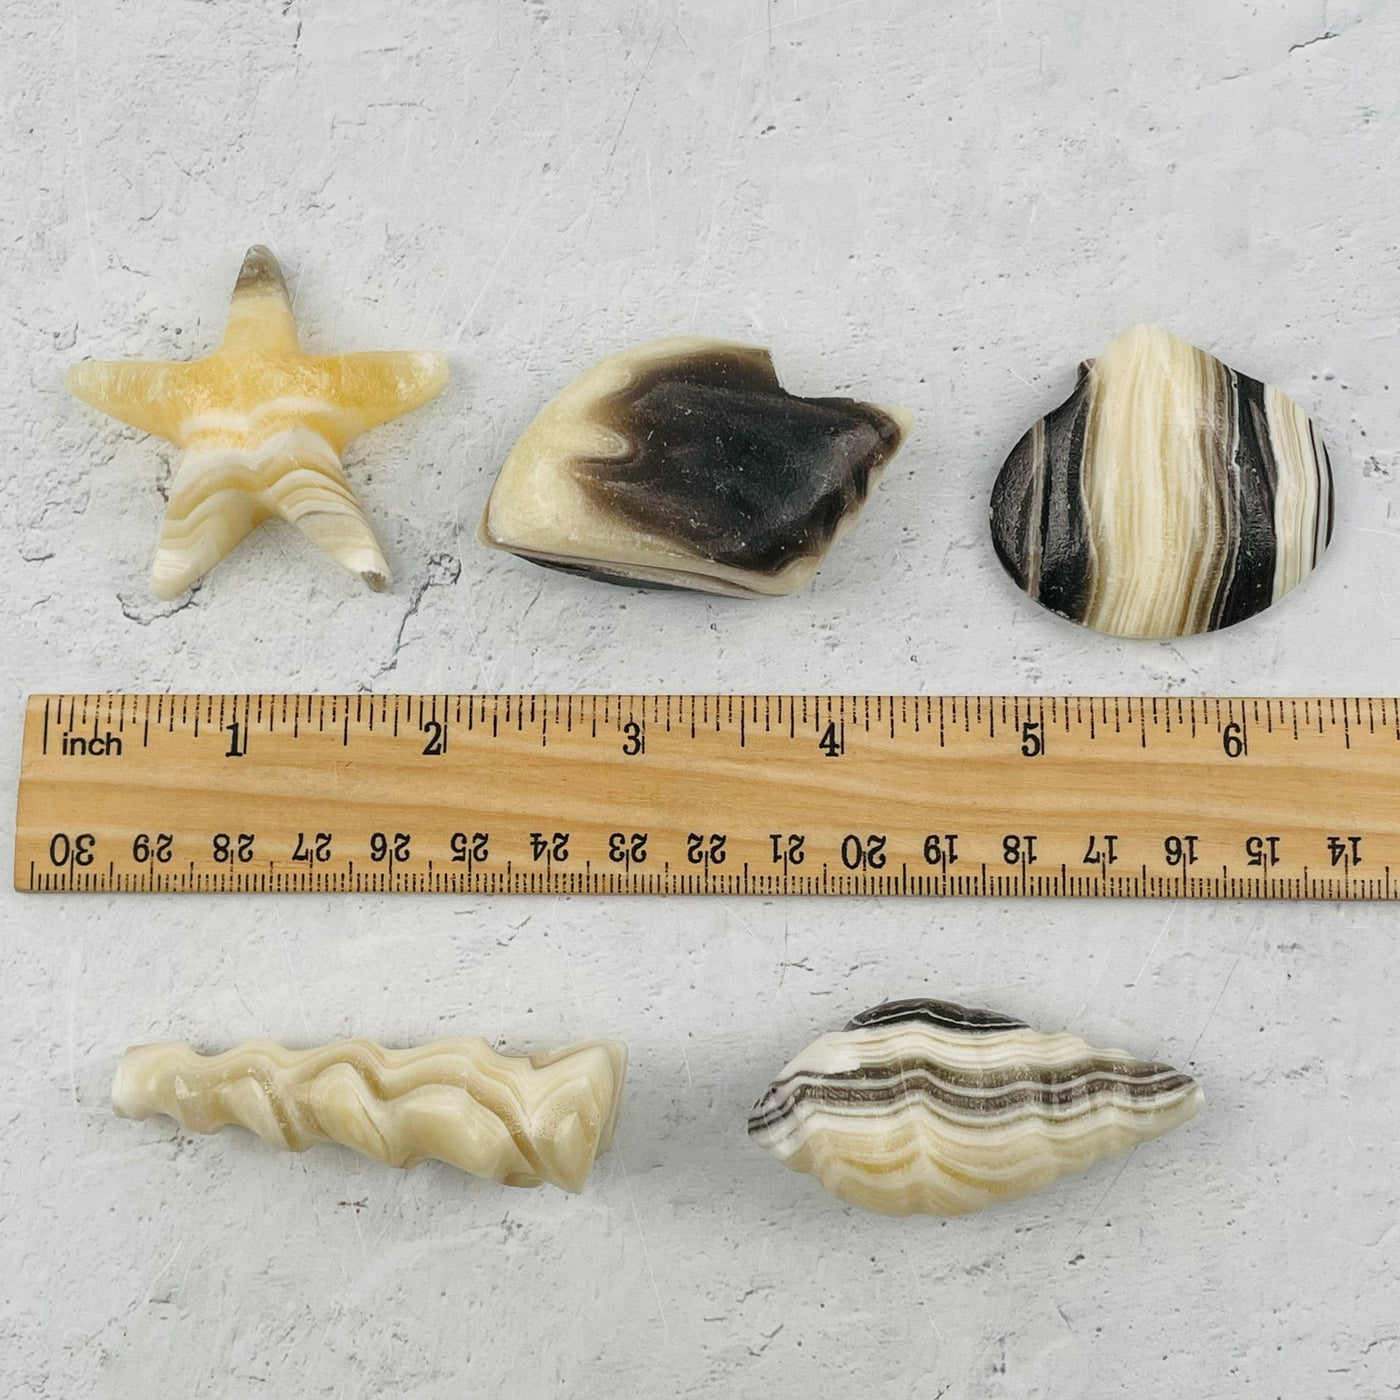 shell shapes next to a ruler for size reference